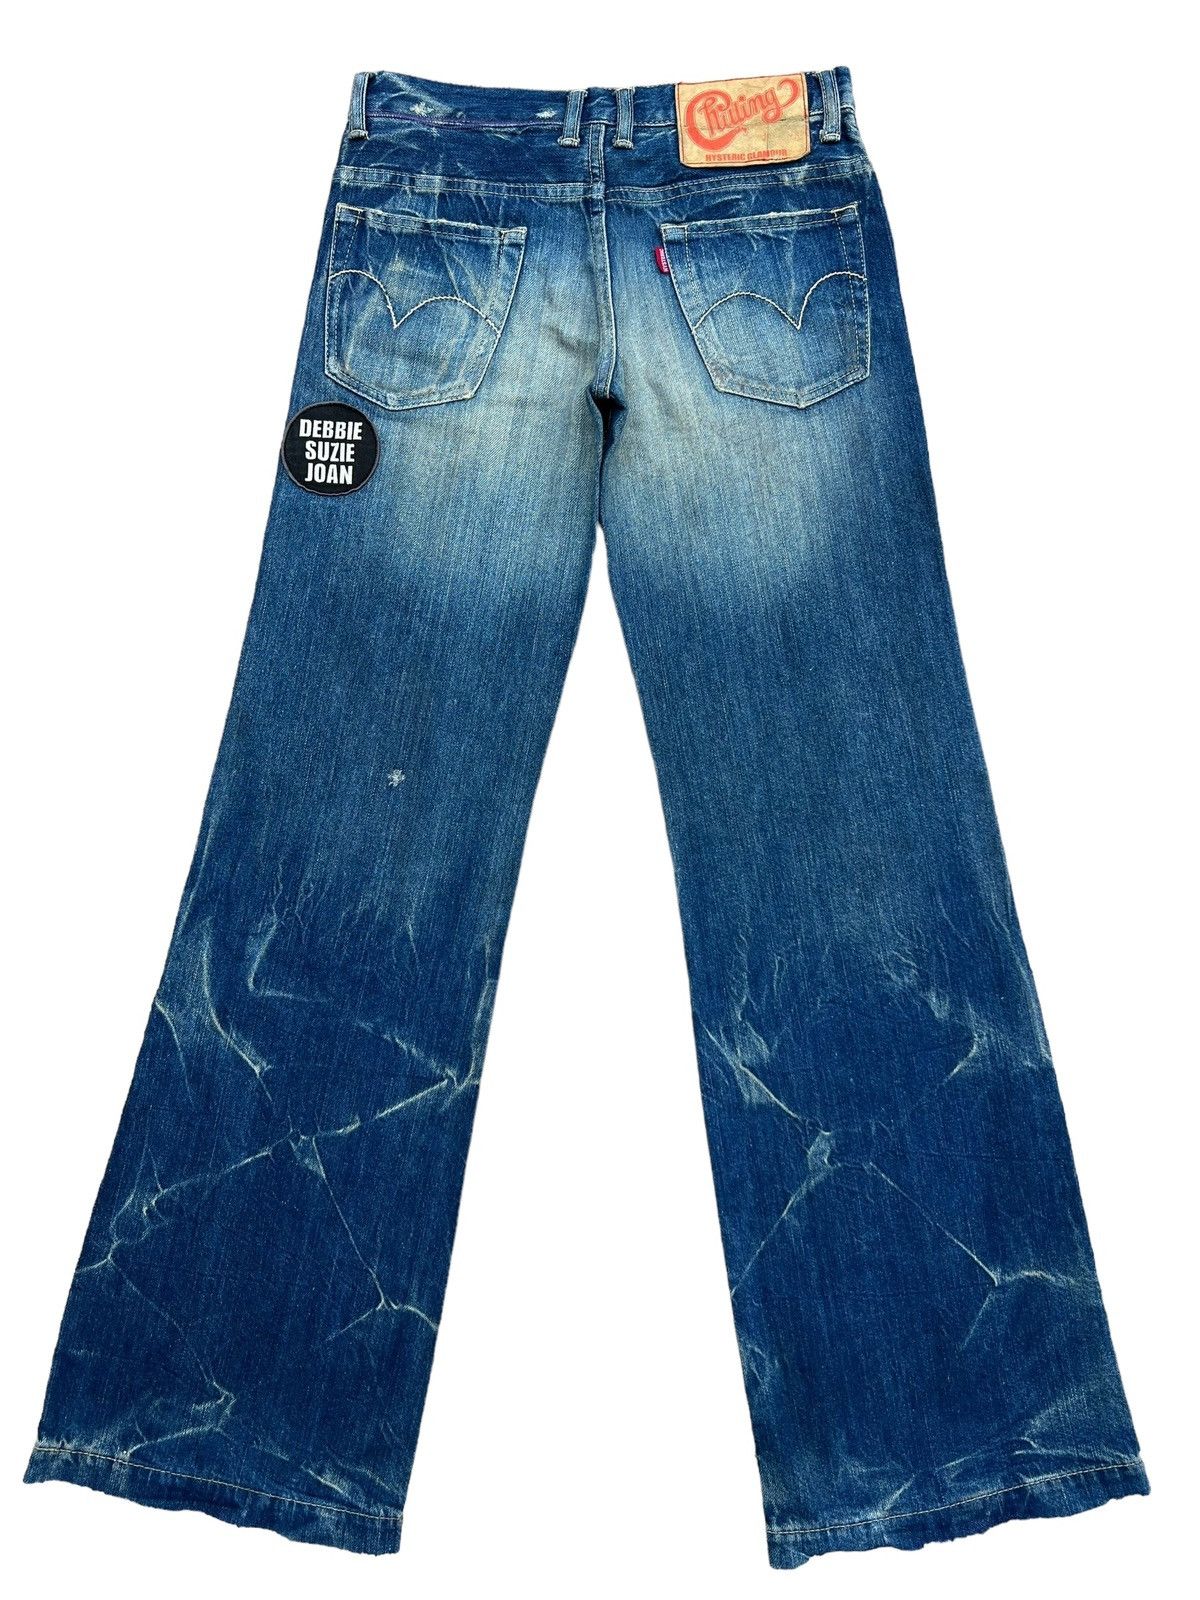 Hysteric Glamour Distressed Lowrise Flare Denim Jeans 29x32 - 3